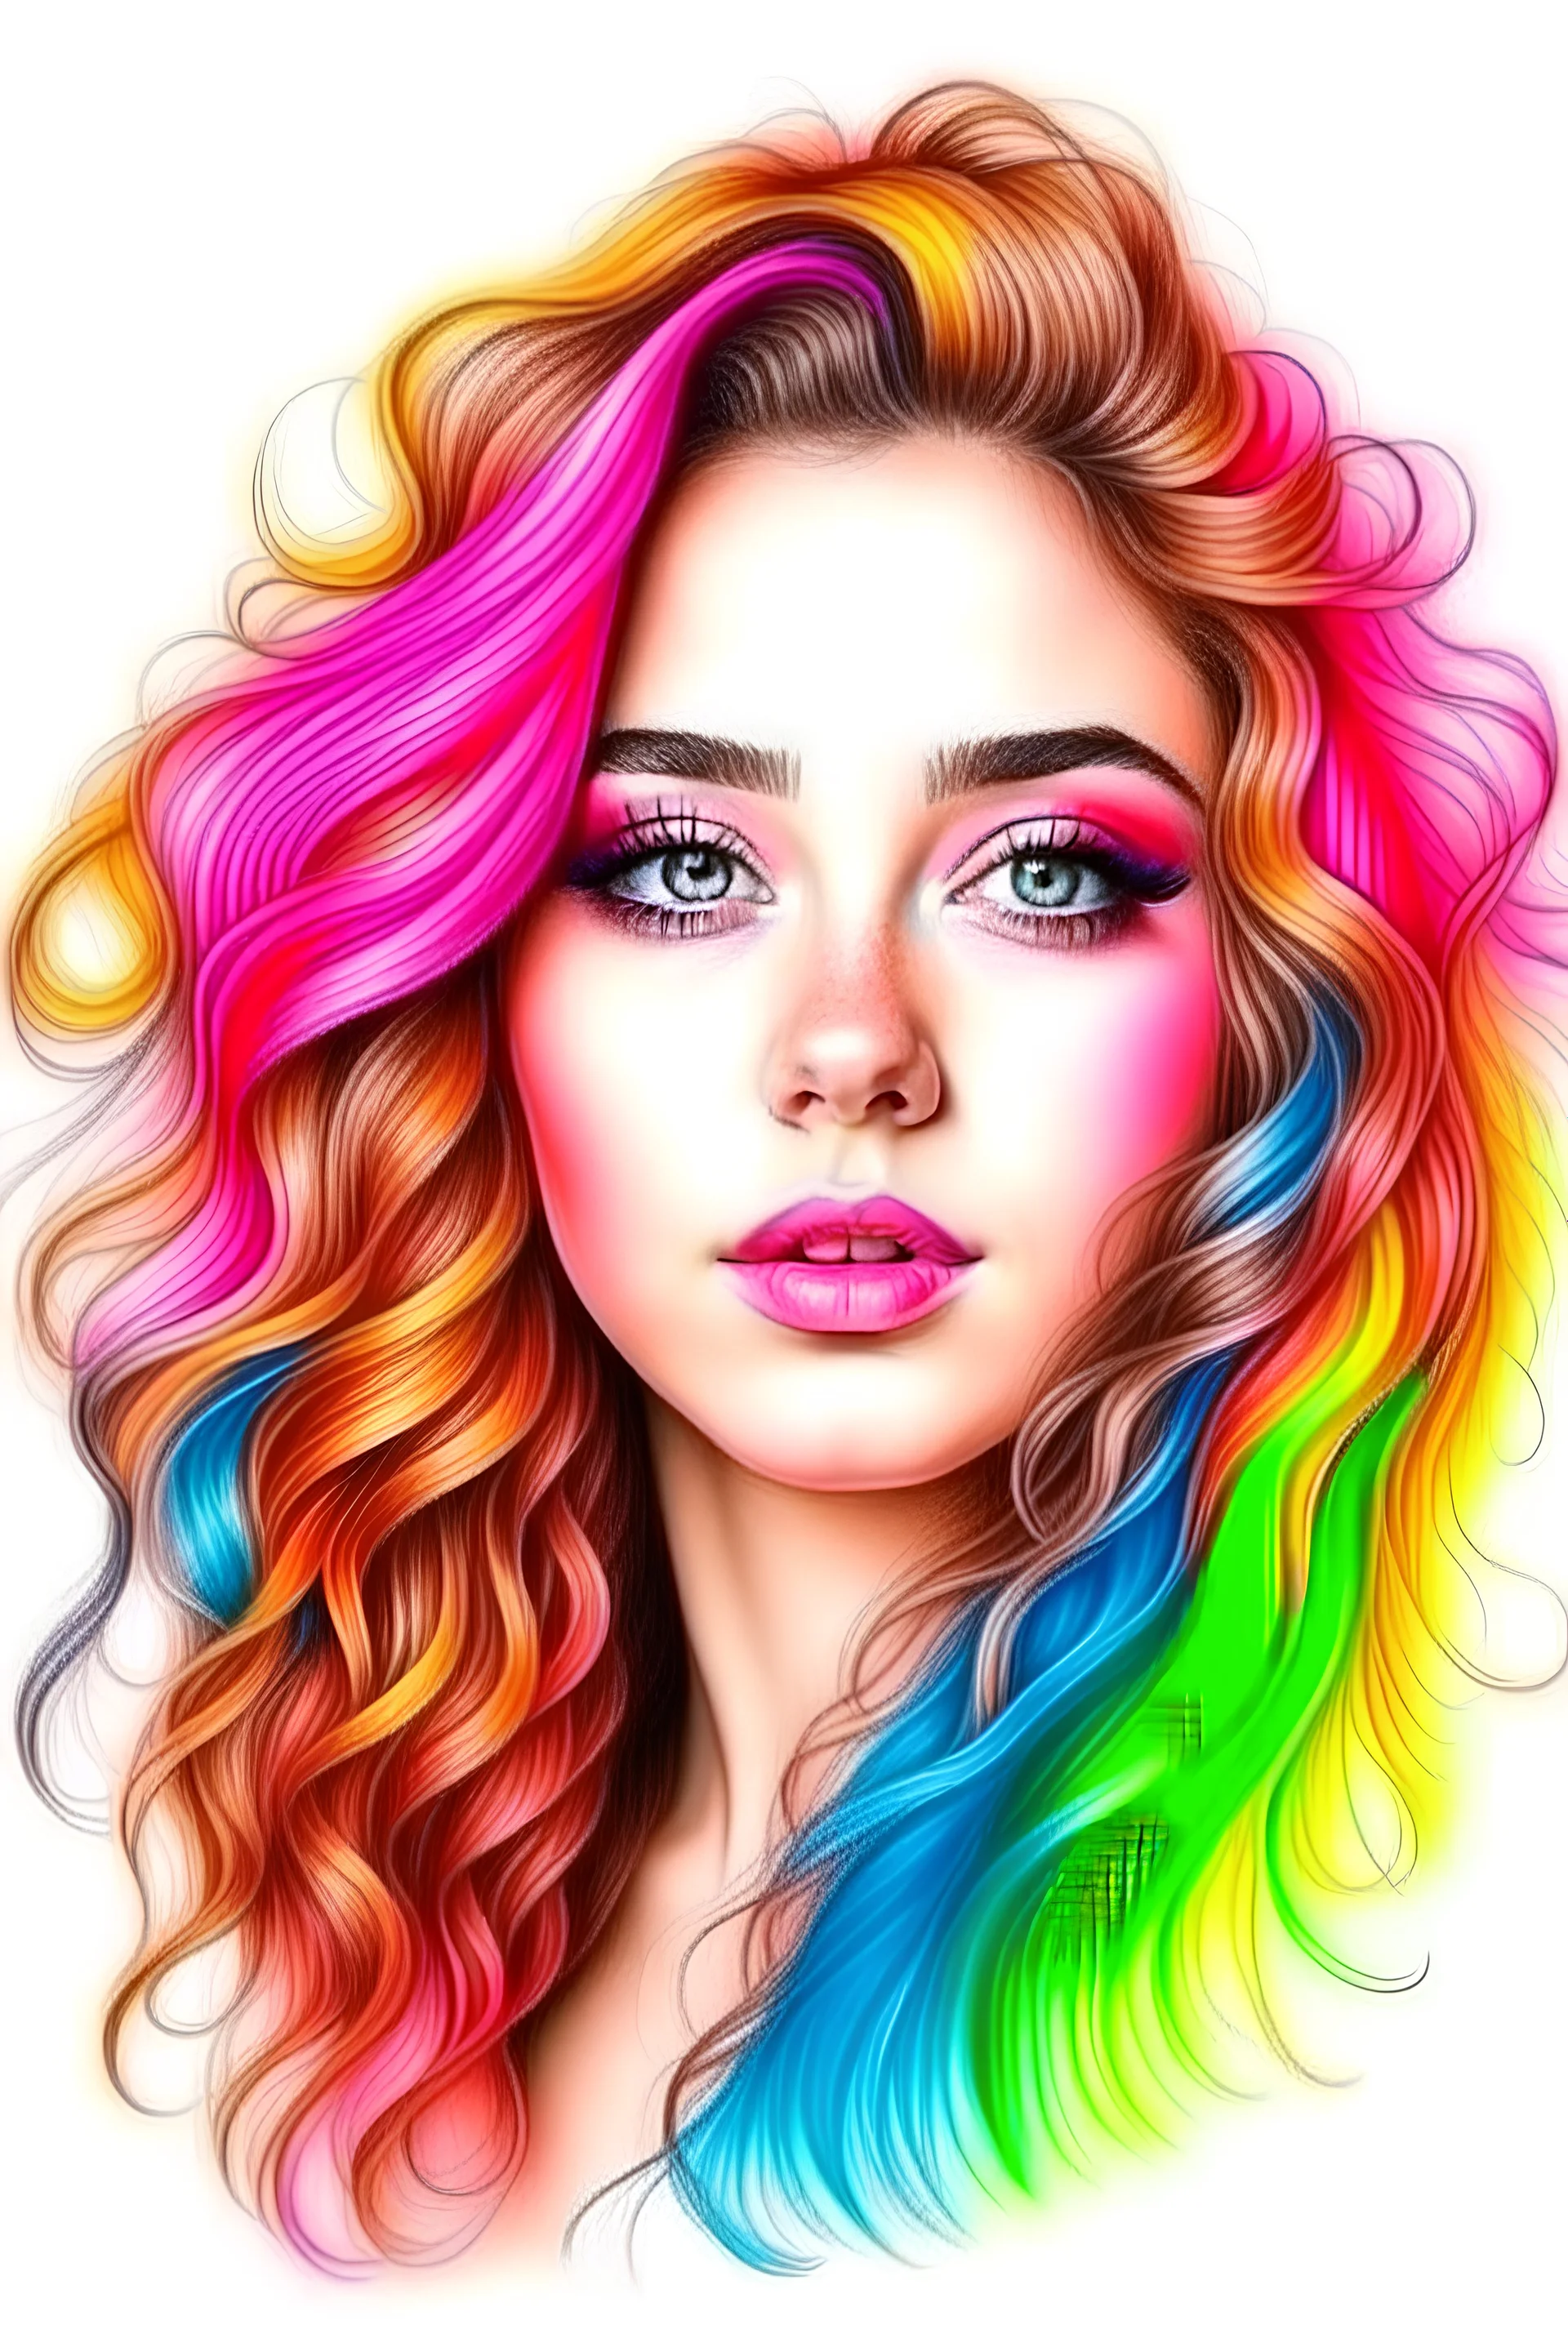 create of beautiful girl face using pencil colors with long curly hair